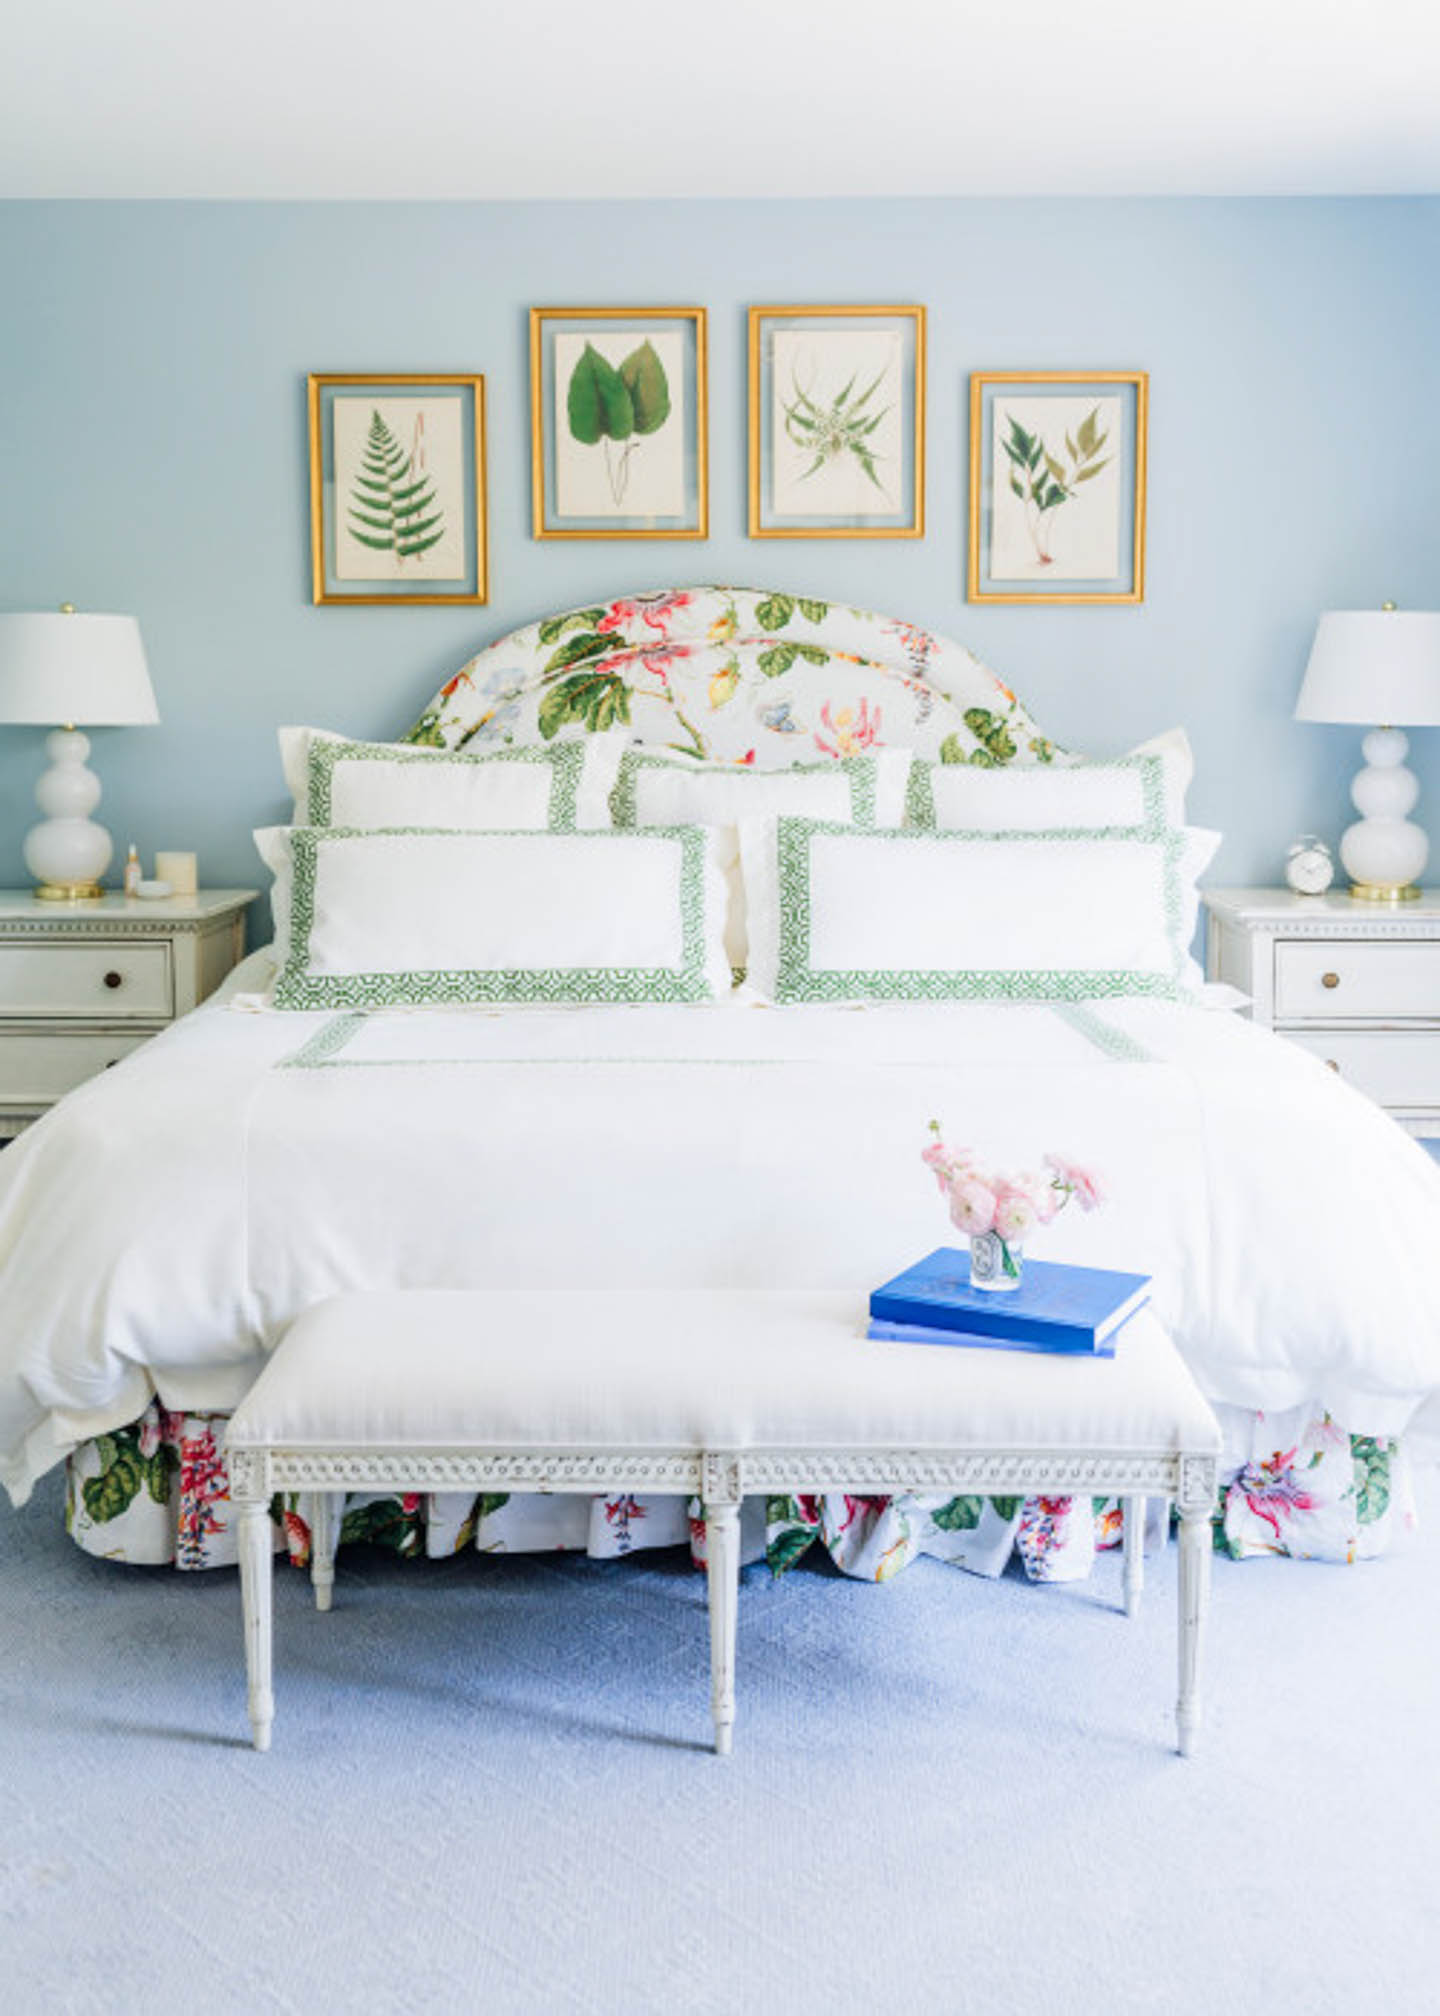 Bedroom painted with light blue walls and decorated with nature-inspired accessories